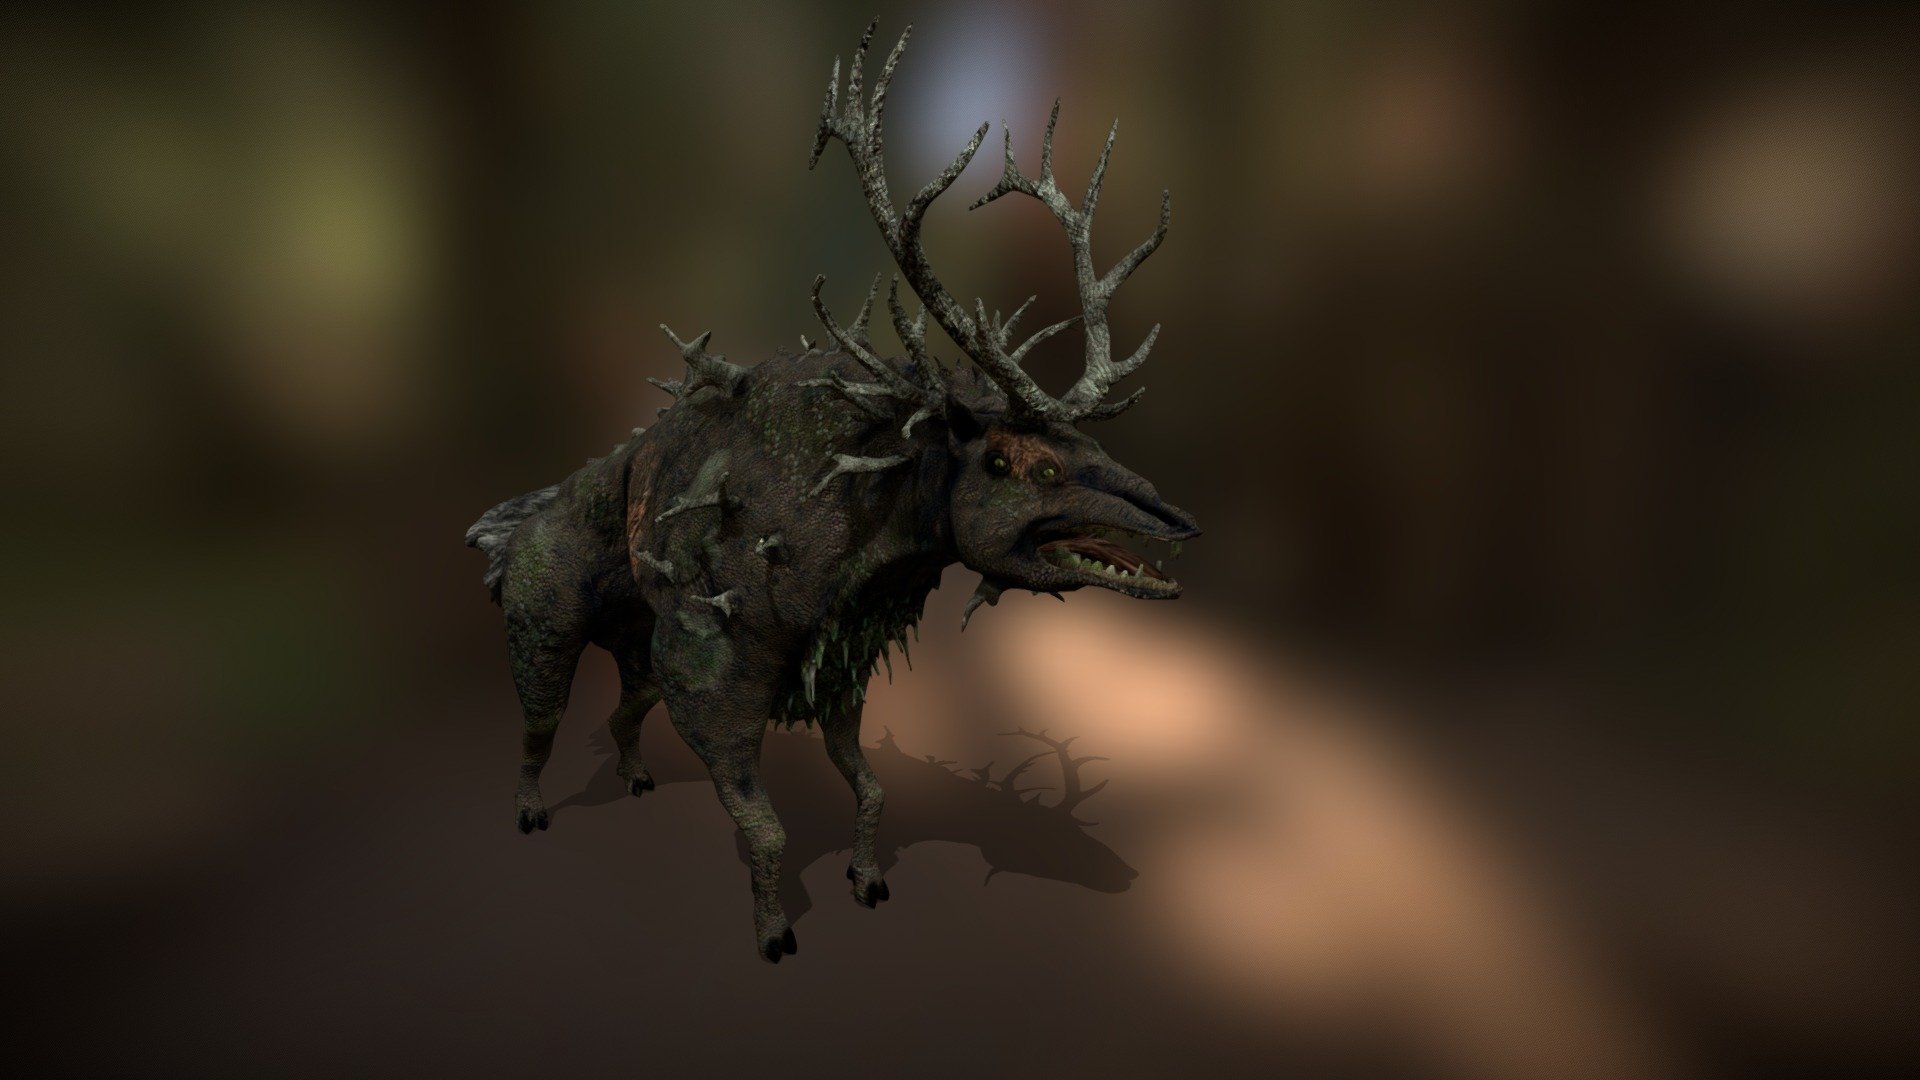 Remake of Stalker mutant that never ended in actual game. Original concept was made for the Monster Ball competition by GSC Game World in 2004. I remade it and modified it to look liek Elk/Deer - Stalker Tark Mutant - 3D model by Akinaro 3d model